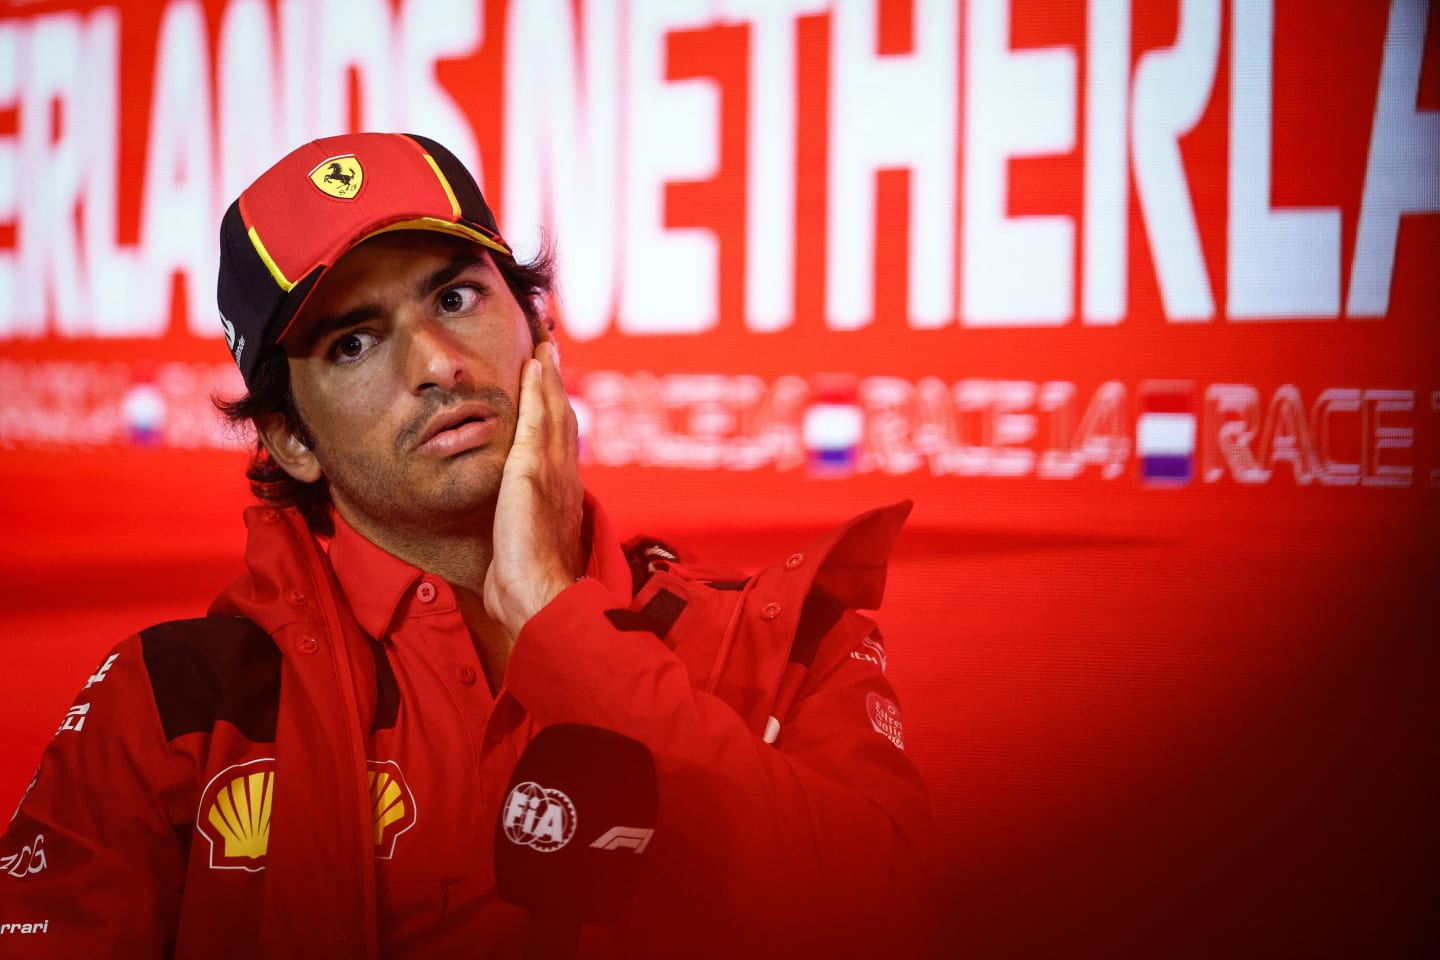 Ferrari's Spanish driver Carlos Sainz Jr gestures during a press conference ahead of the Dutch Formula One Grand Prix, in the coastal town of Zandvoort on August 24, 2023. The 2023 Dutch Grand Prix will take place on August 27, 2023. (Photo by Simon Wohlfahrt / AFP) (Photo by SIMON WOHLFAHRT/AFP via Getty Images)